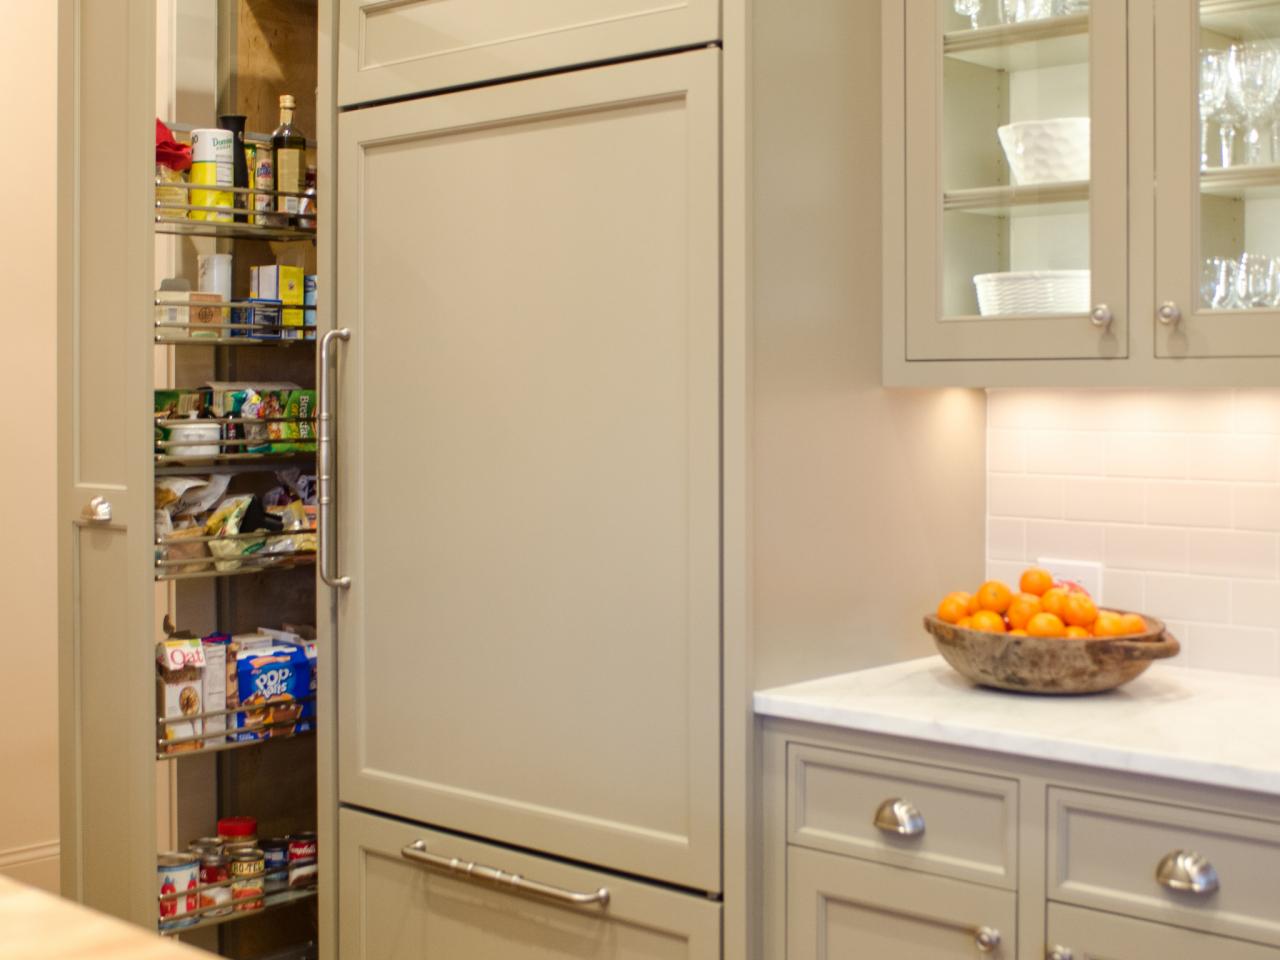 Pantry Cabinet Plans Pictures, Options, Tips & Ideas   HGTV